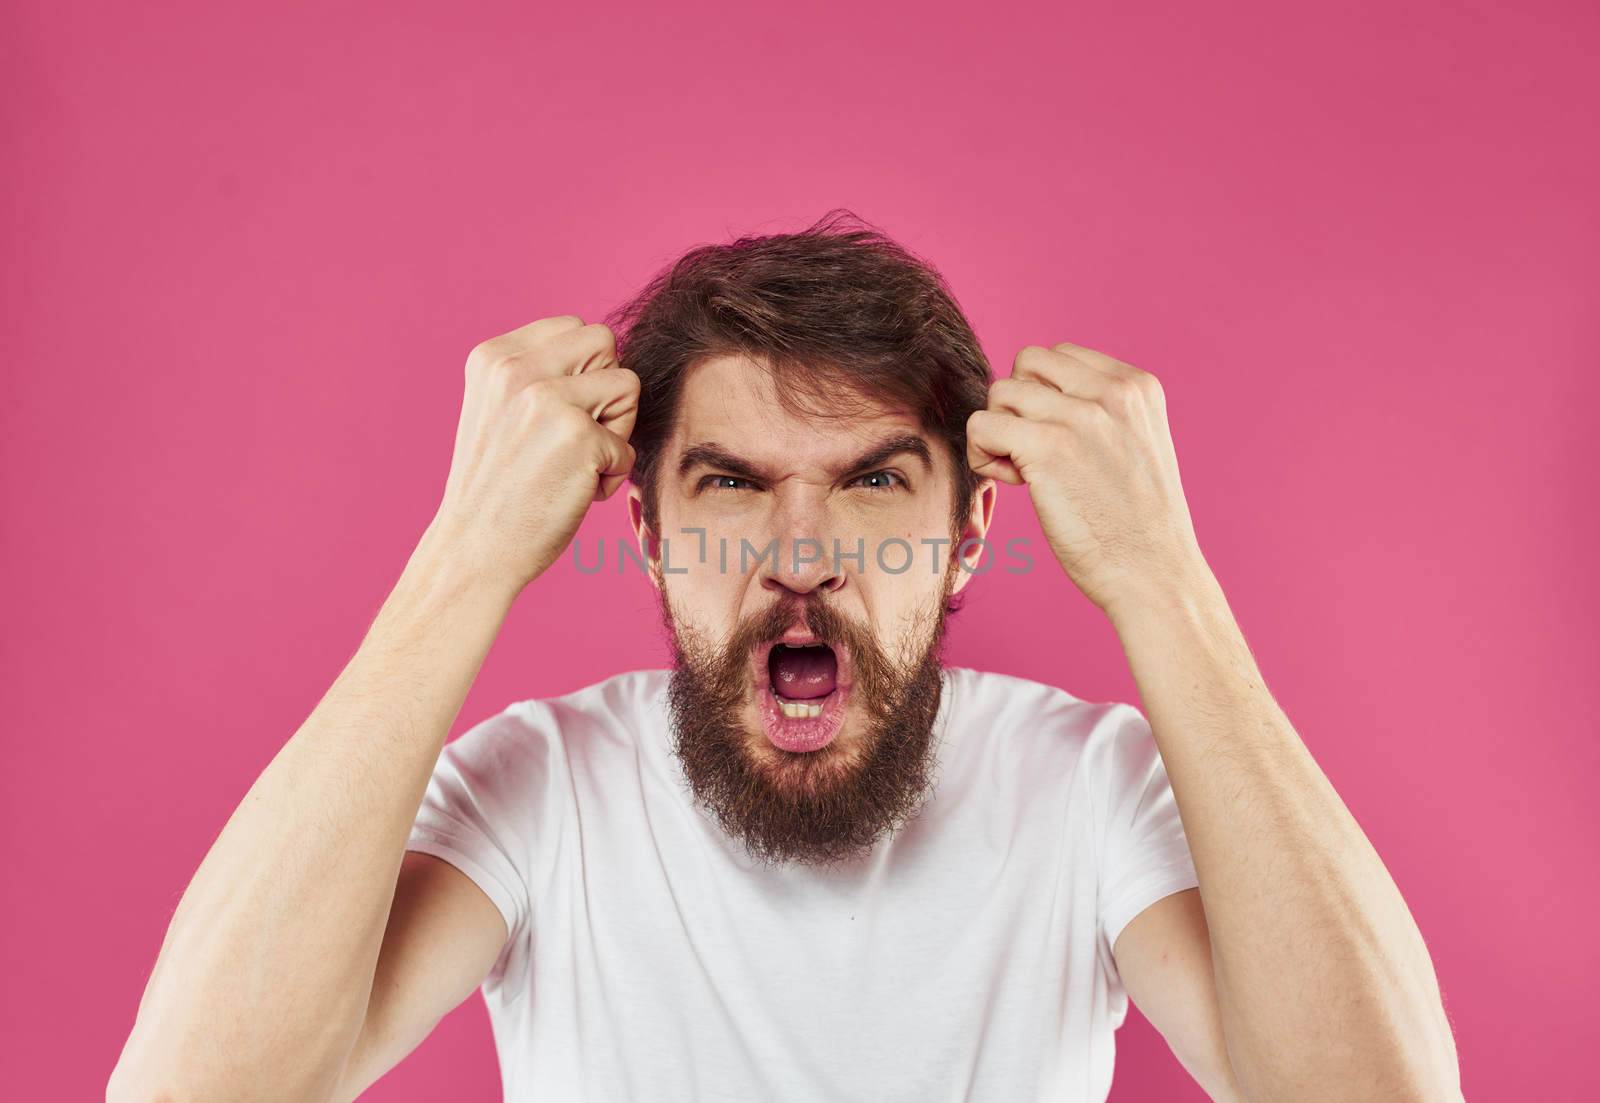 Man on a pink background surprise irritability emotions and stress by SHOTPRIME